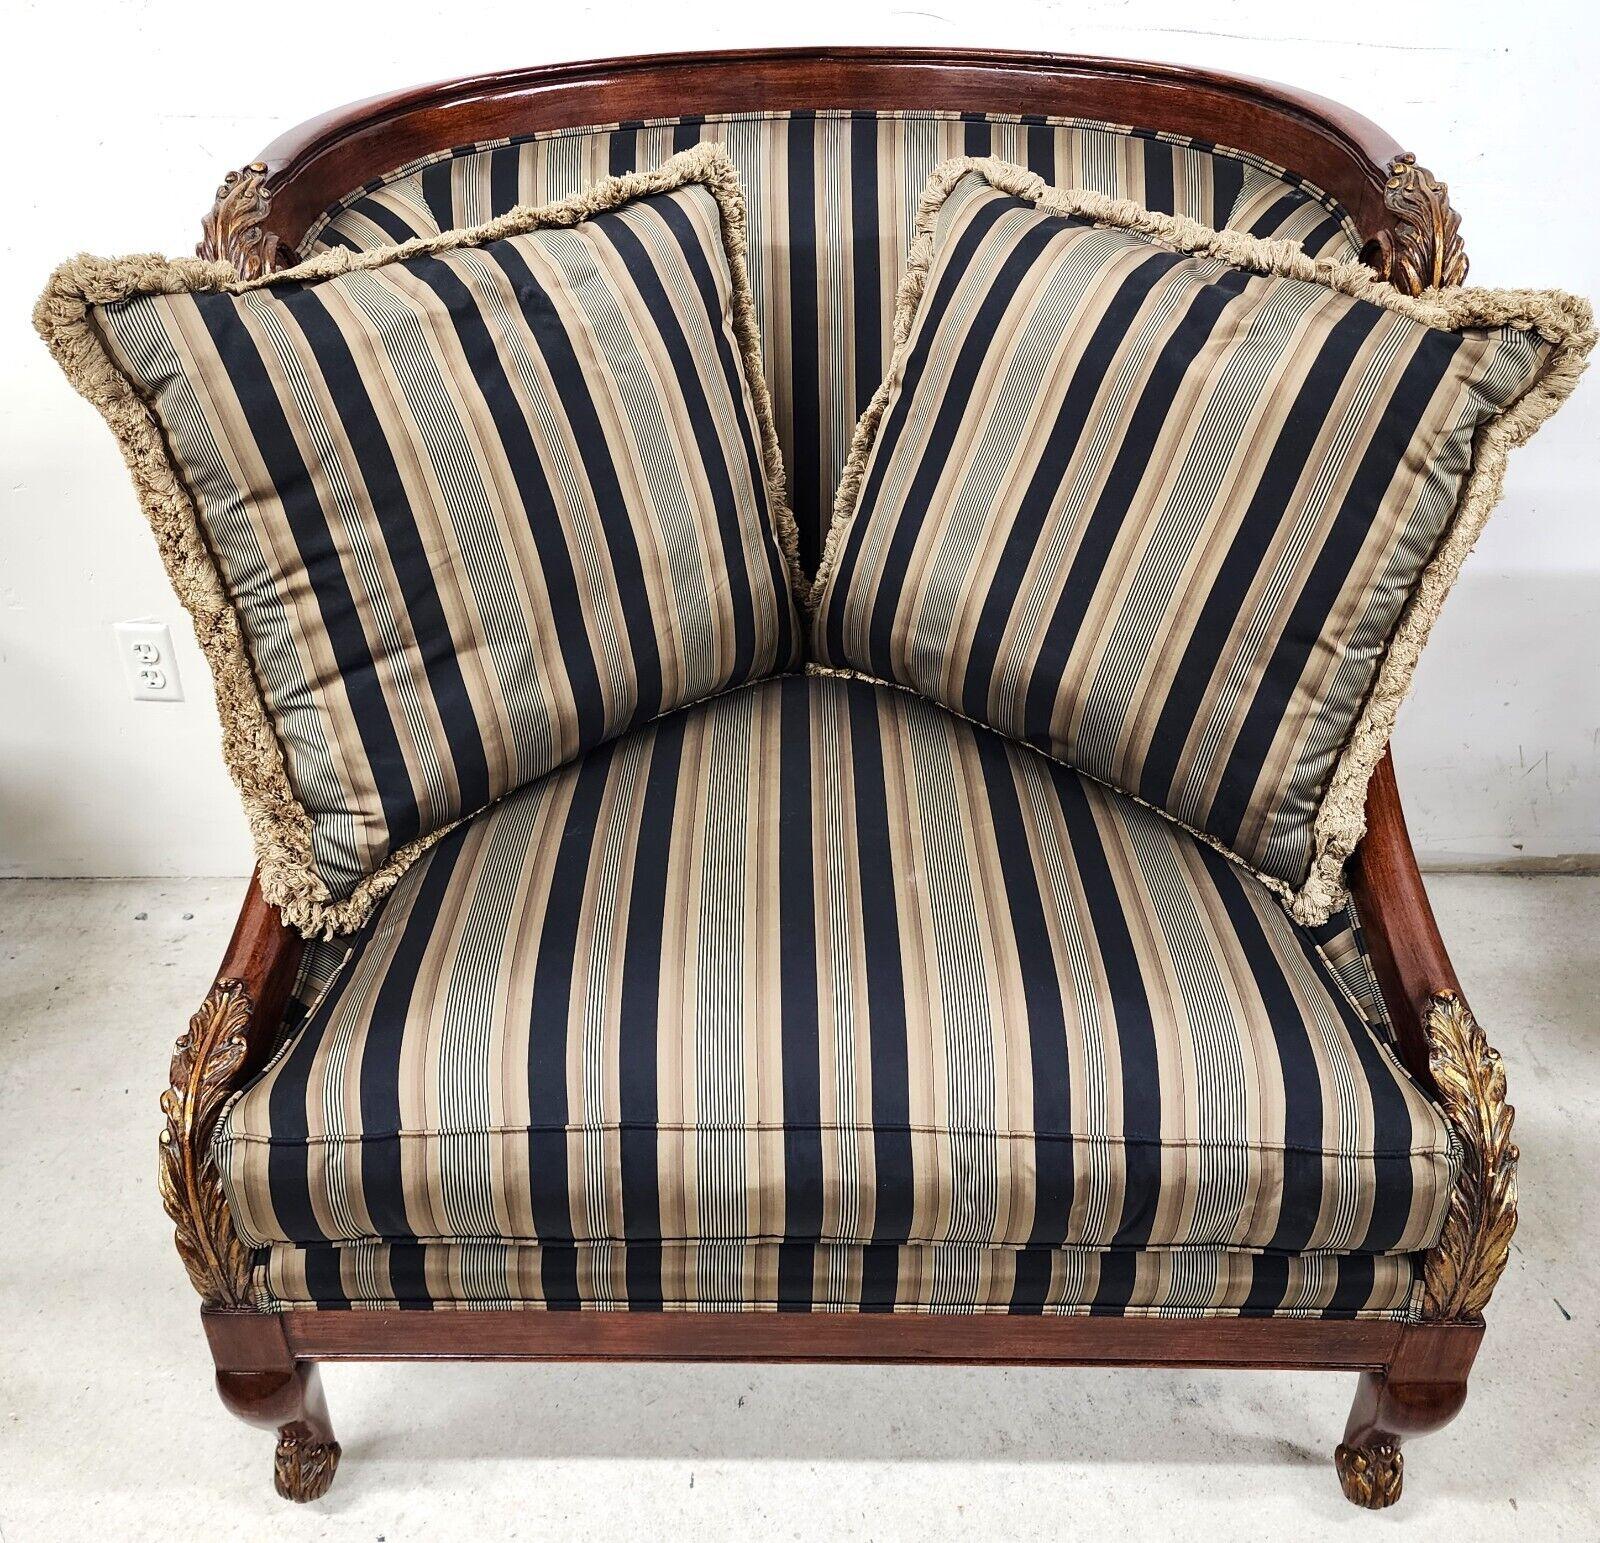 For FULL item description click on CONTINUE READING at the bottom of this page.

Offering One Of Our Recent Palm Beach Estate Fine Furniture Acquisitions Of An 
Oversized Lounge Settee Chair by Marge Carson
Impressively scaled statement chair